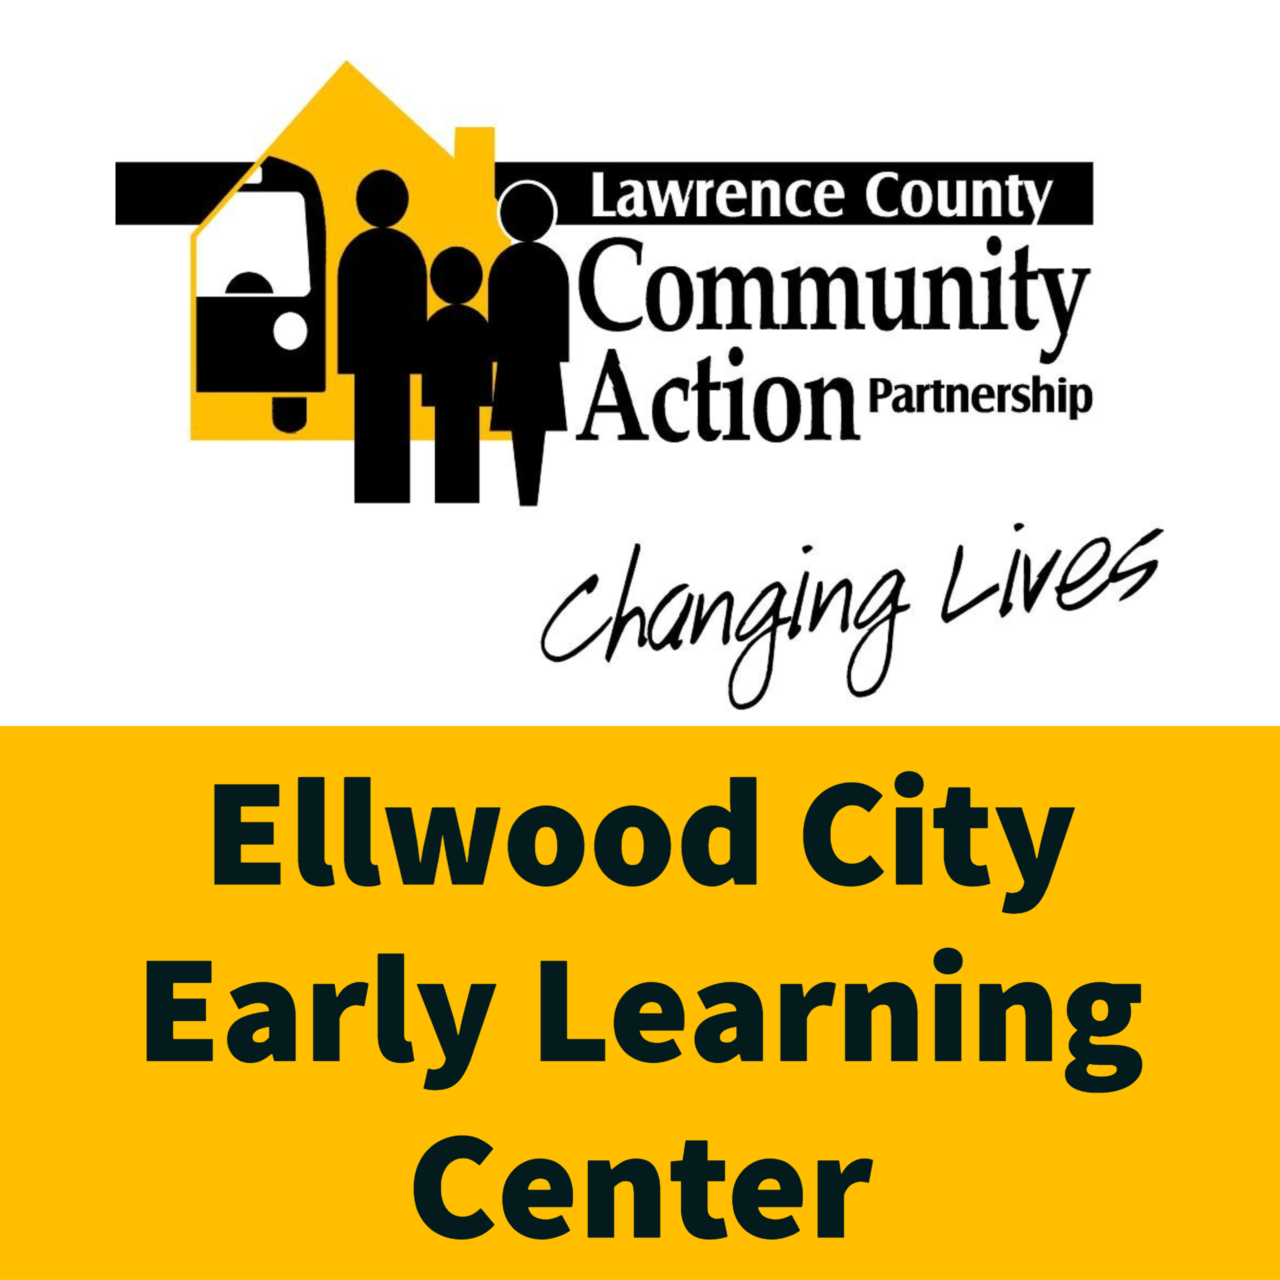 Ellwood City Early Learning Center